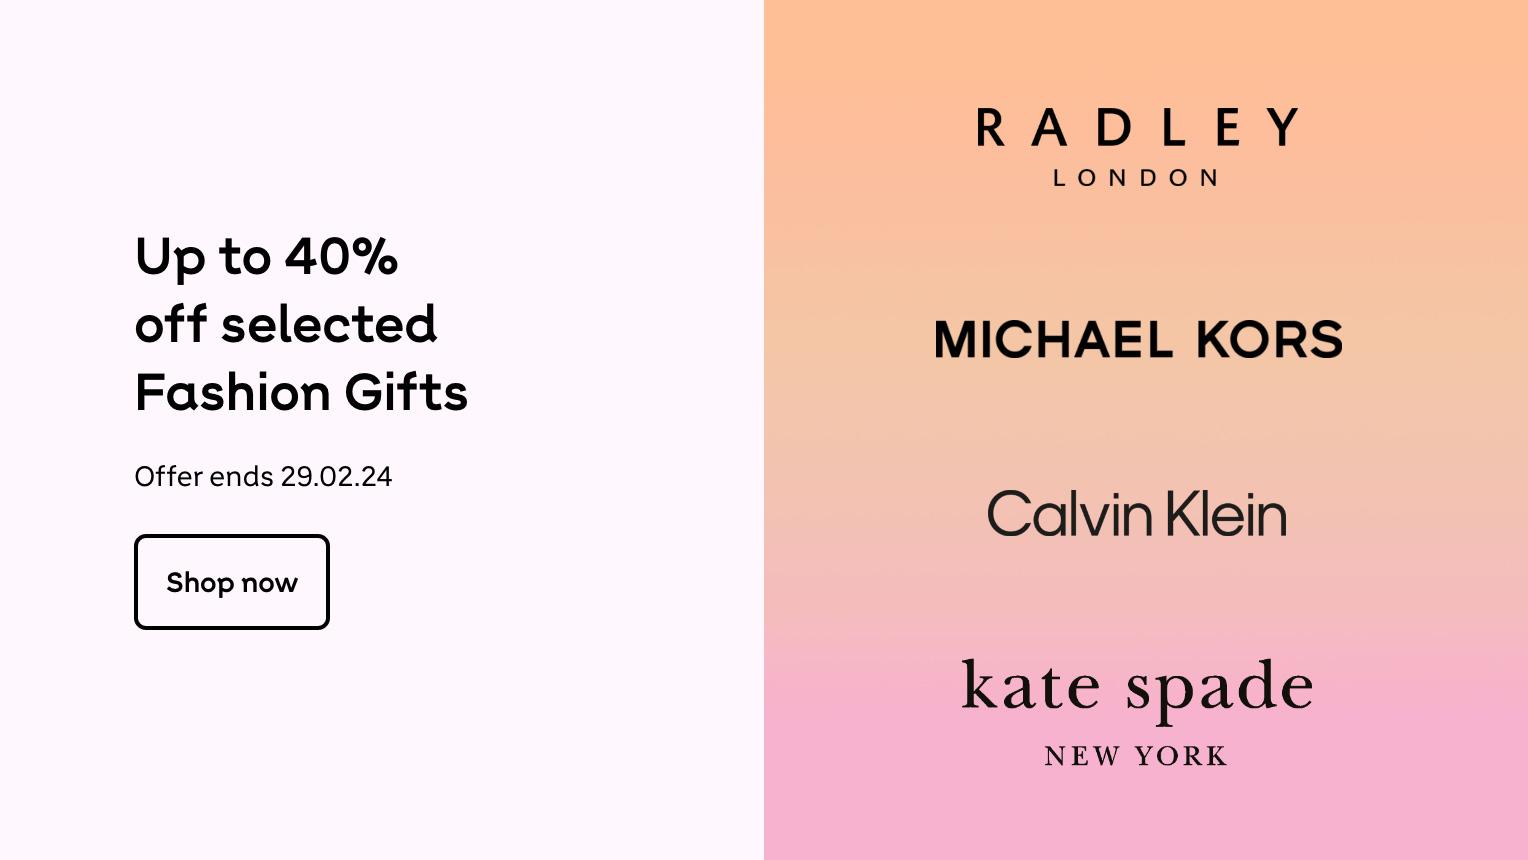 Up to 40%
off selected
Beauty Gifts
Offer ends 29.02.24
Shop now